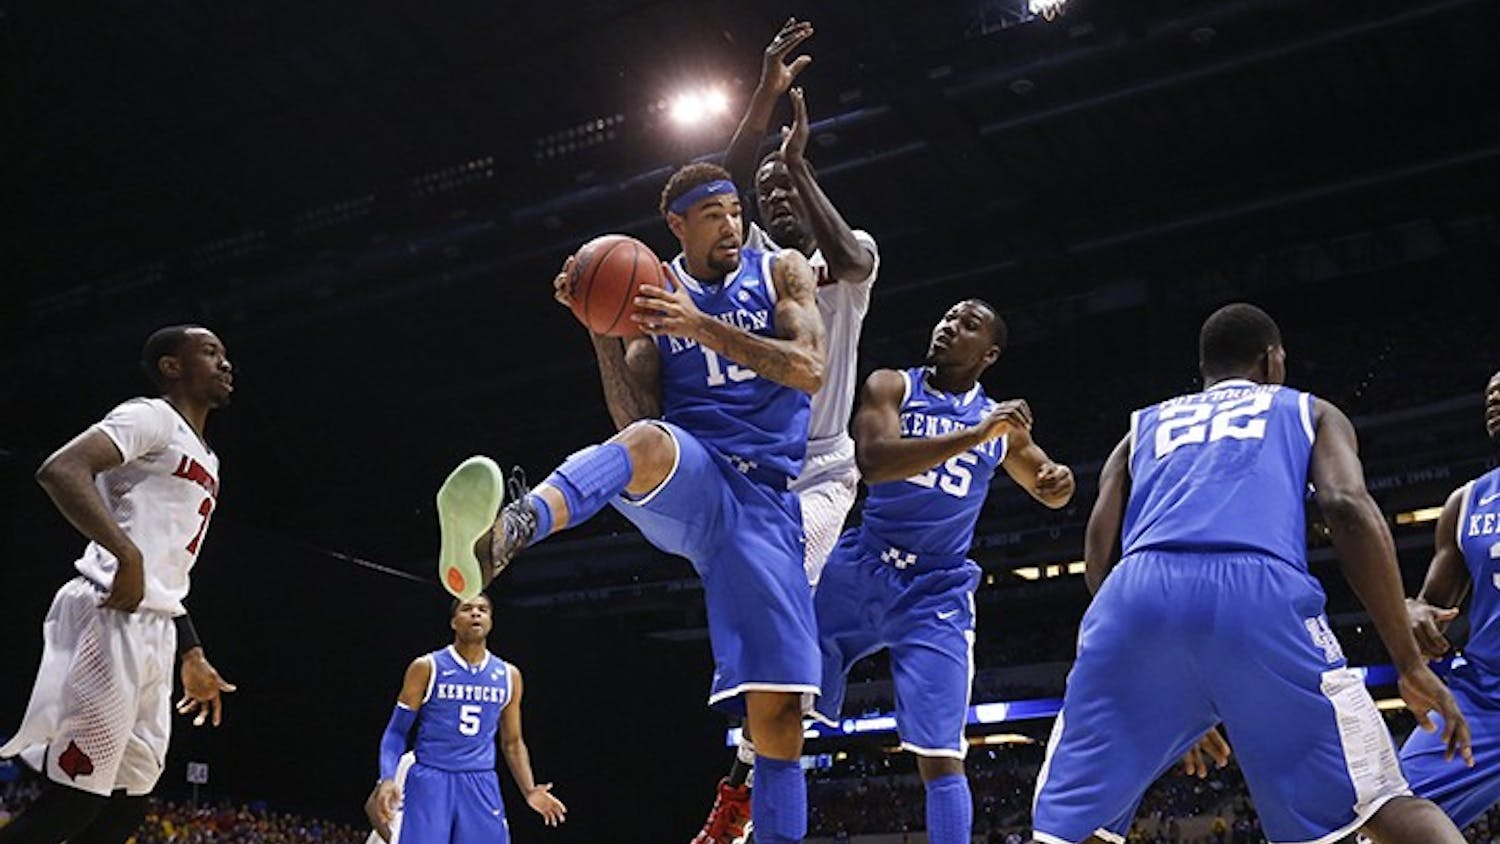 Kentucky&apos;s Willie Cauley-Stein (15) pulls down a rebound against Louisville in the NCAA Tournament&apos;s Midwest Region semifinal at Lucas Oil Stadium in Indianapolis on Friday, March 28, 2014. (Mark Cornelison/Lexington Herald-Leader/MCT)